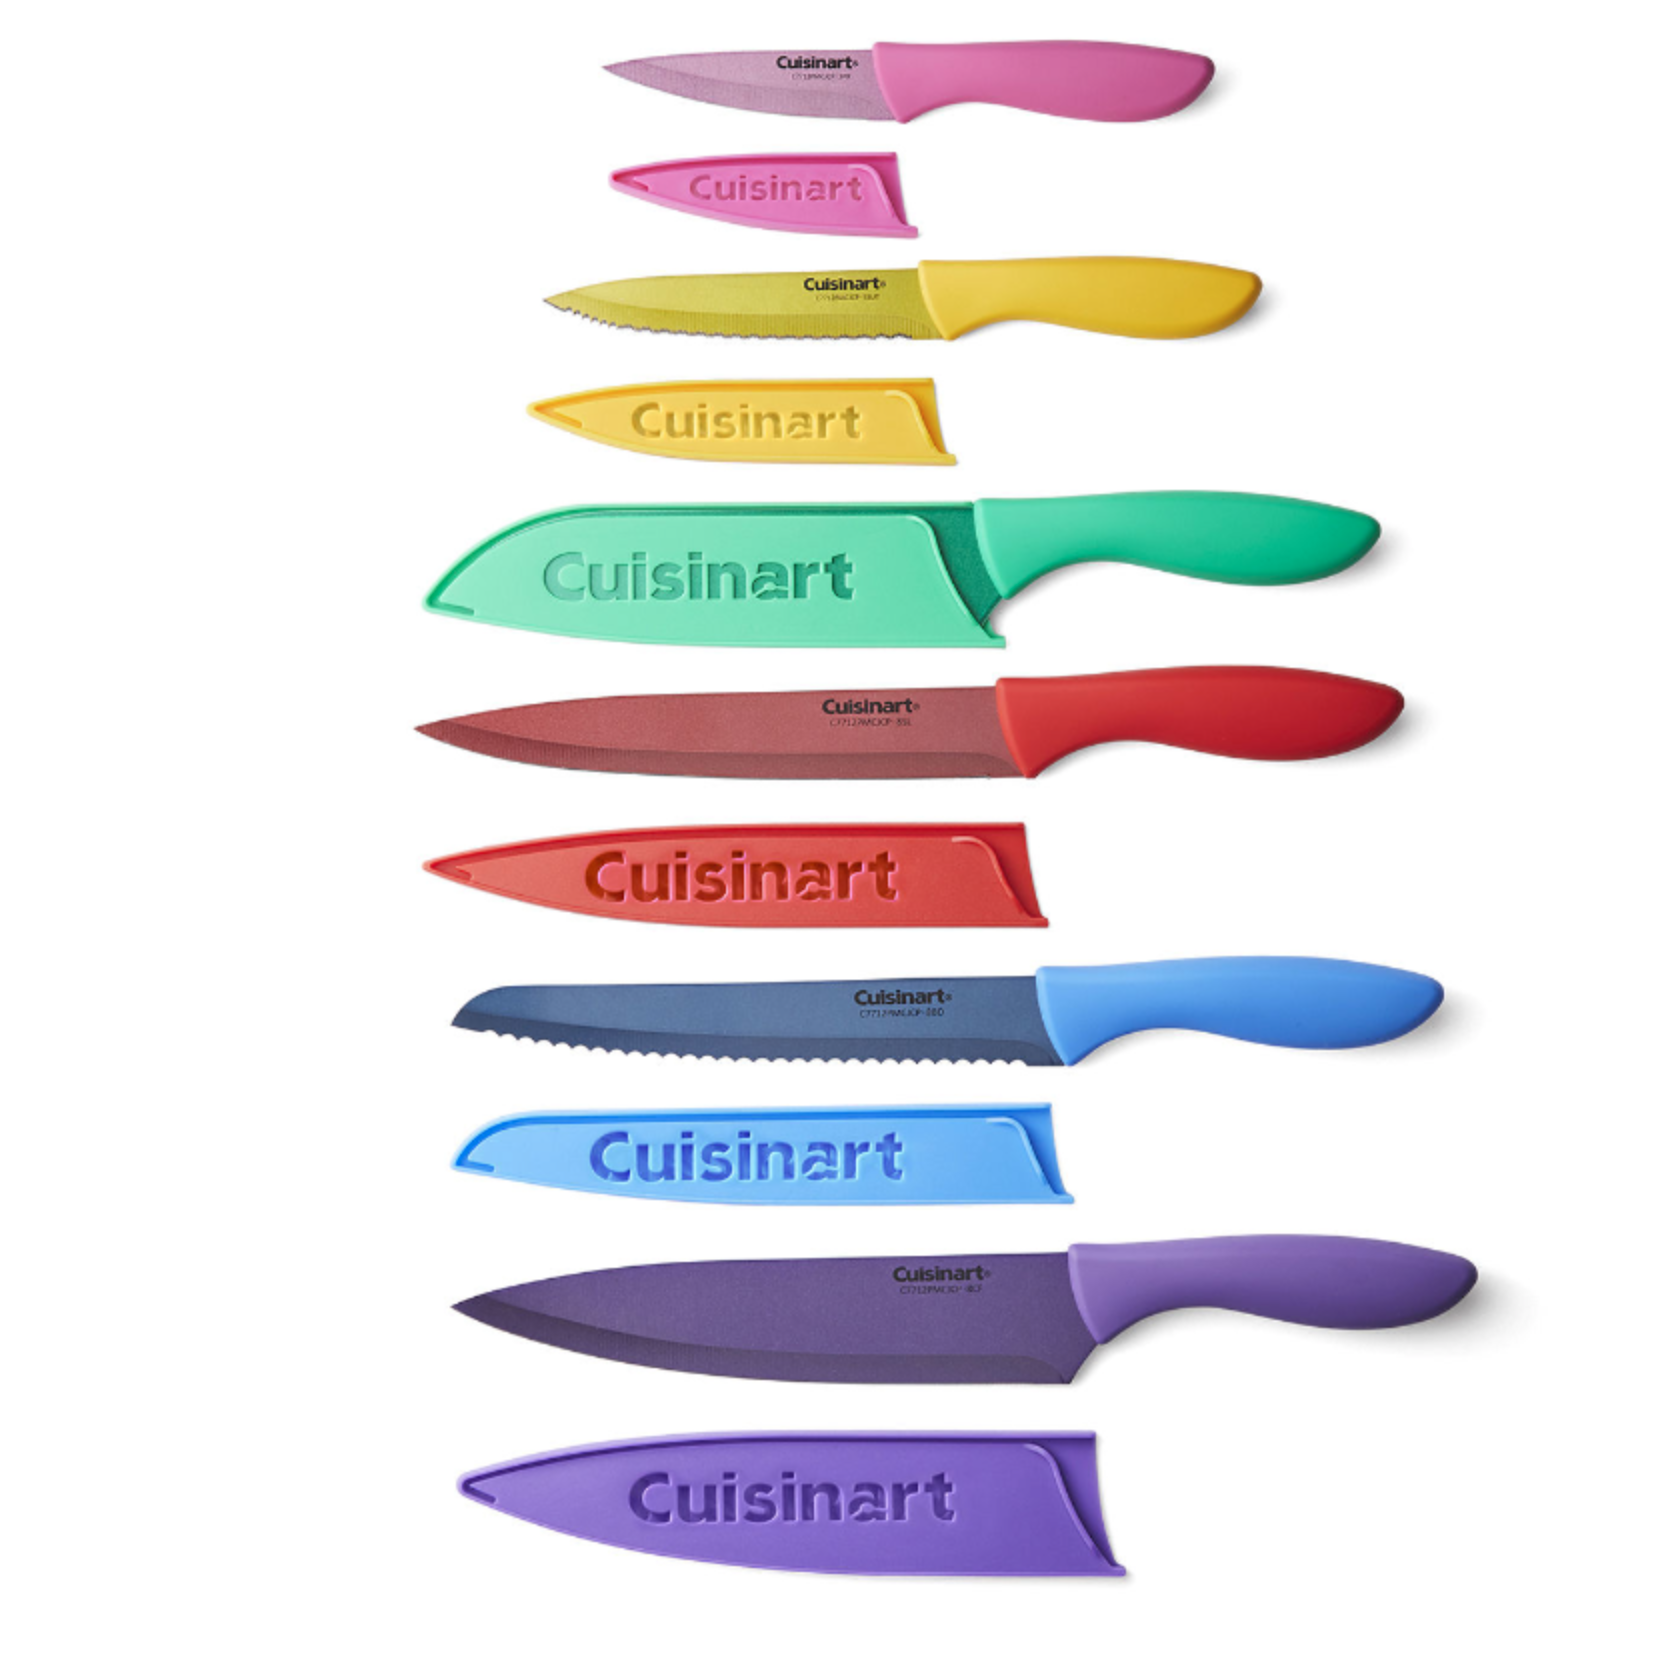 jcpenney-cuisinart-cutlery-sets-only-7-99-after-rebate